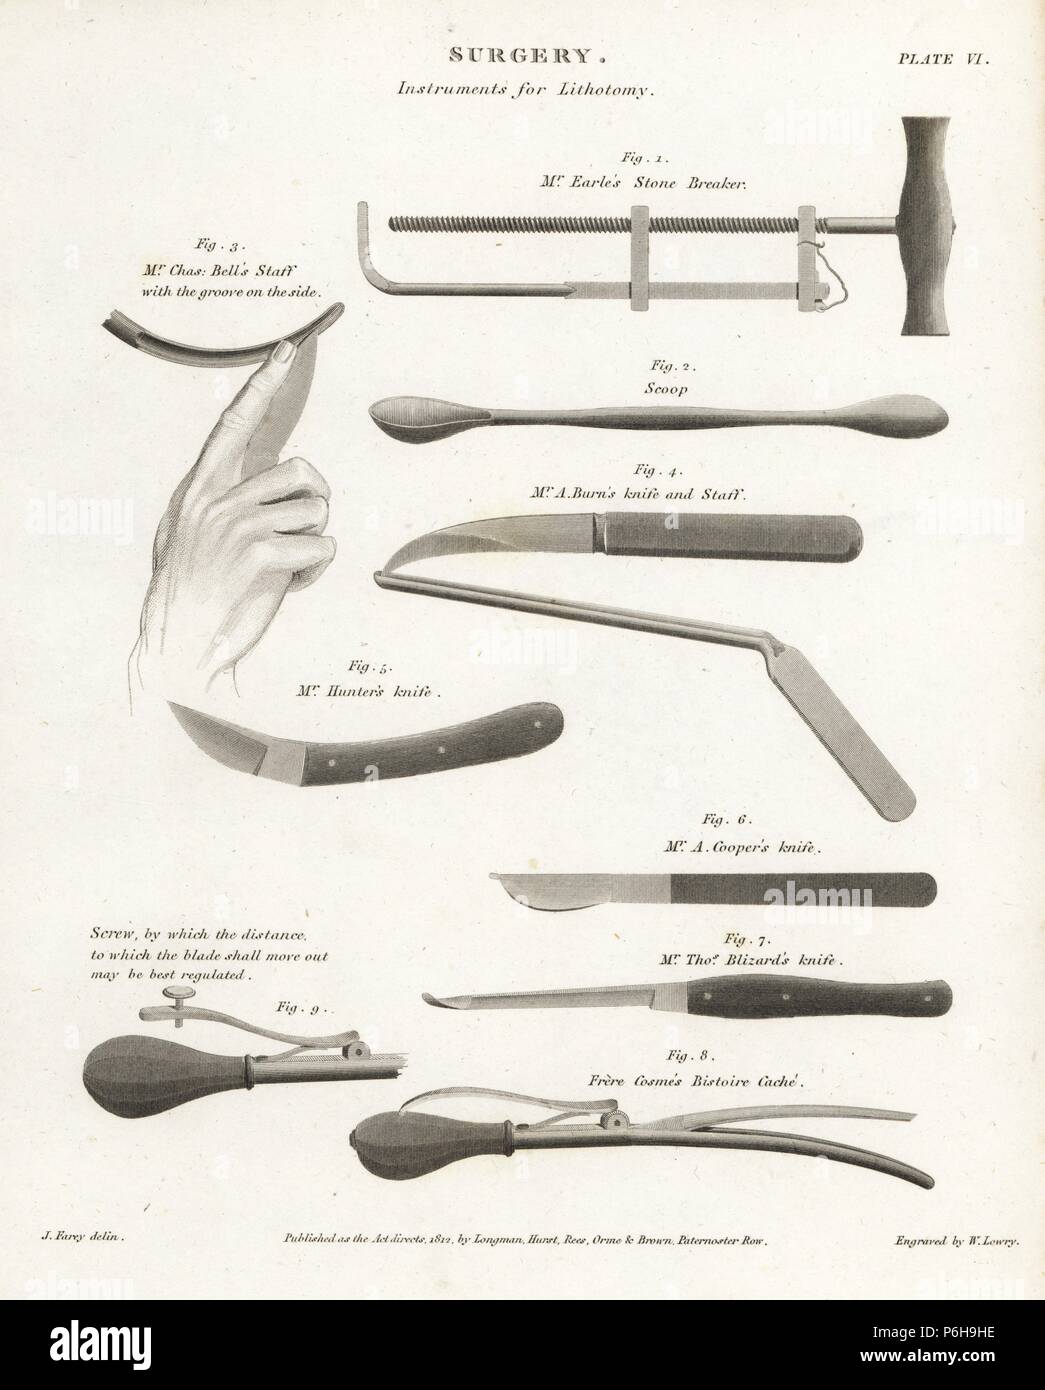 Surgical equipment for a lithotomy: Mr. Earle's stone breaker, Mr. Charles Bell's staff, scoop, Mr. A. Burns' knife and staff, Mr. Hunter's knife, Mr. A. Cooper's knife, screw, Mr. Thomas Blizard's knife, and Frere Cosme's bistoire cache from the 19th century. Copperplate engraving by Wilson Lowry after an illustration by J. Farey from Abraham Rees' 'Cyclopedia or Universal Dictionary,' London, 1812. Stock Photo